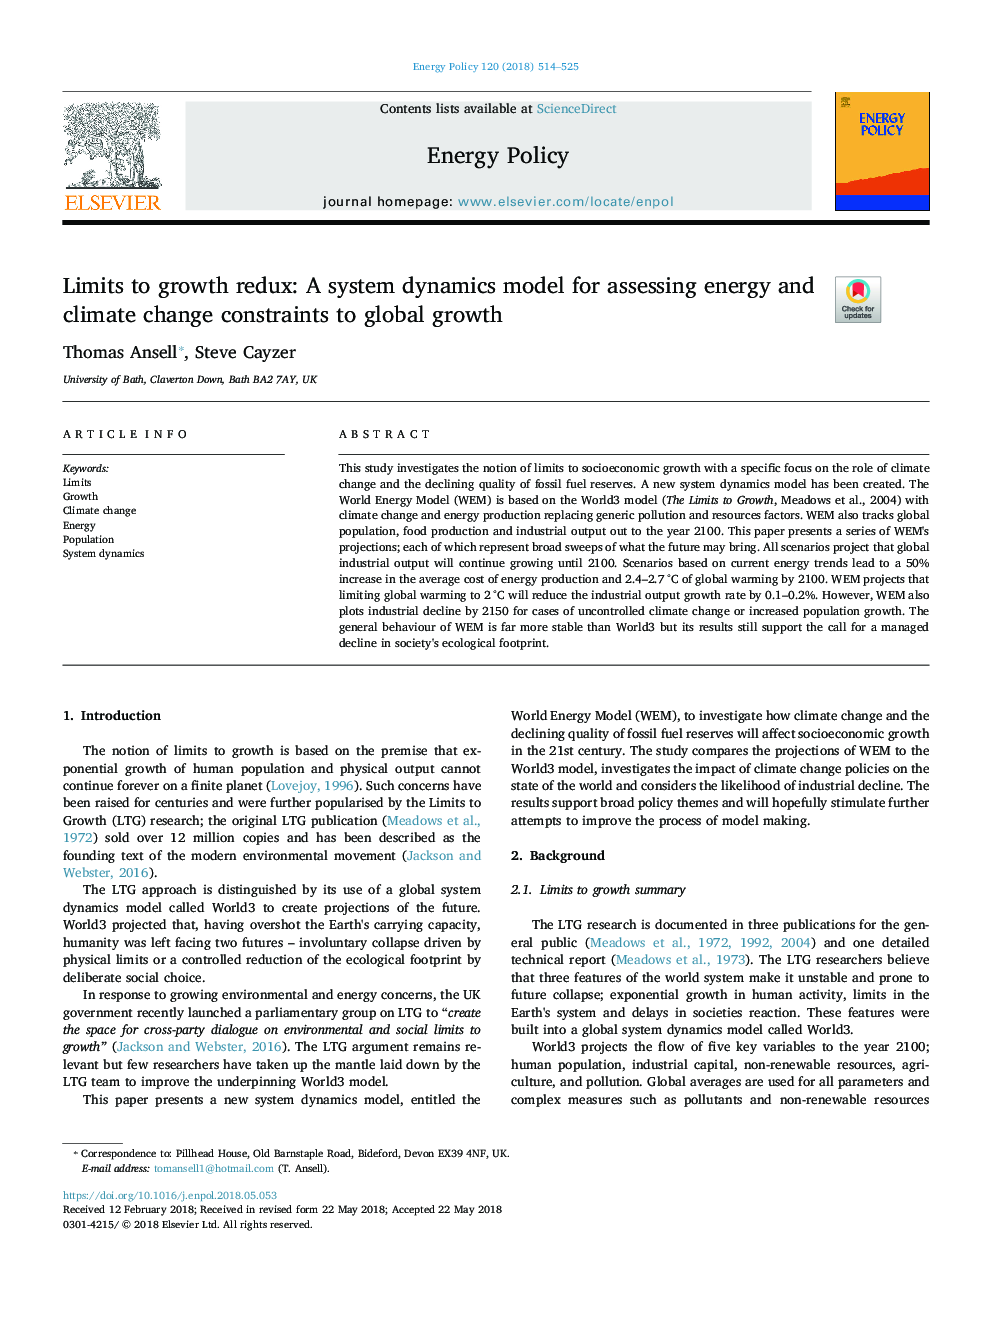 Limits to growth redux: A system dynamics model for assessing energy and climate change constraints to global growth